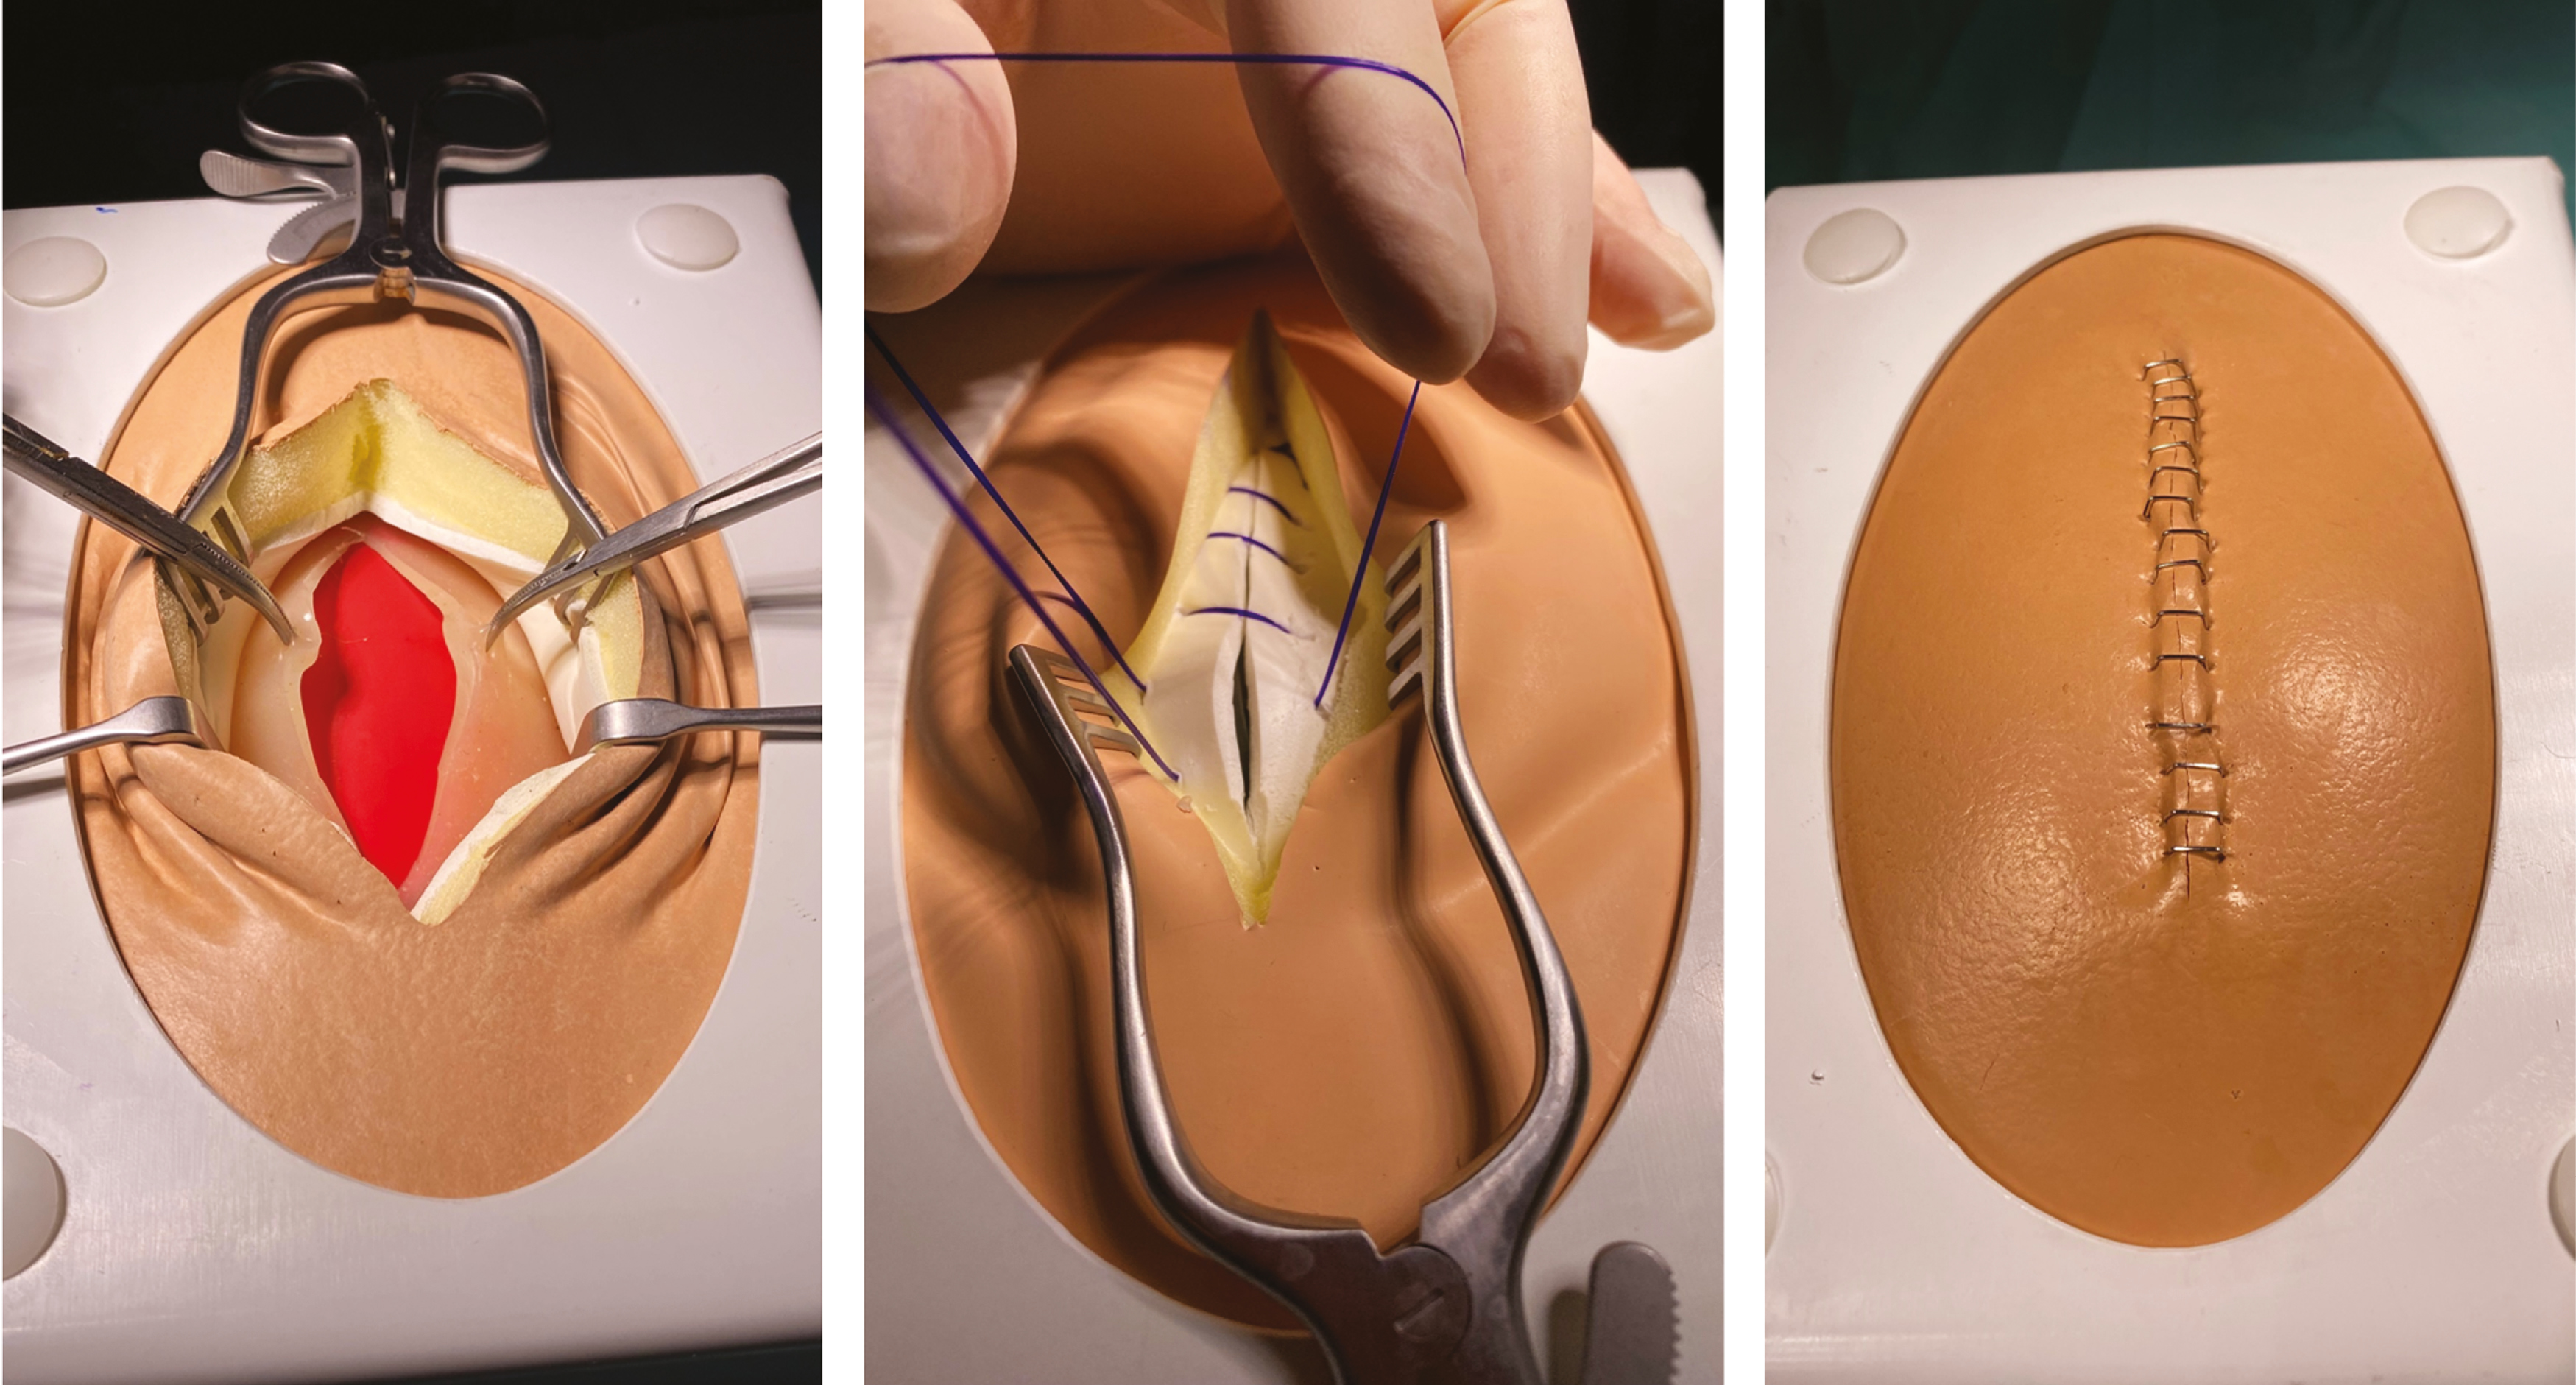 The tissue layers are exposed, with two small artery forceps manipulating the peritoneal layer (left). Closure of linea alba using continuous sutures (middle). Closure of skin using staples (right).